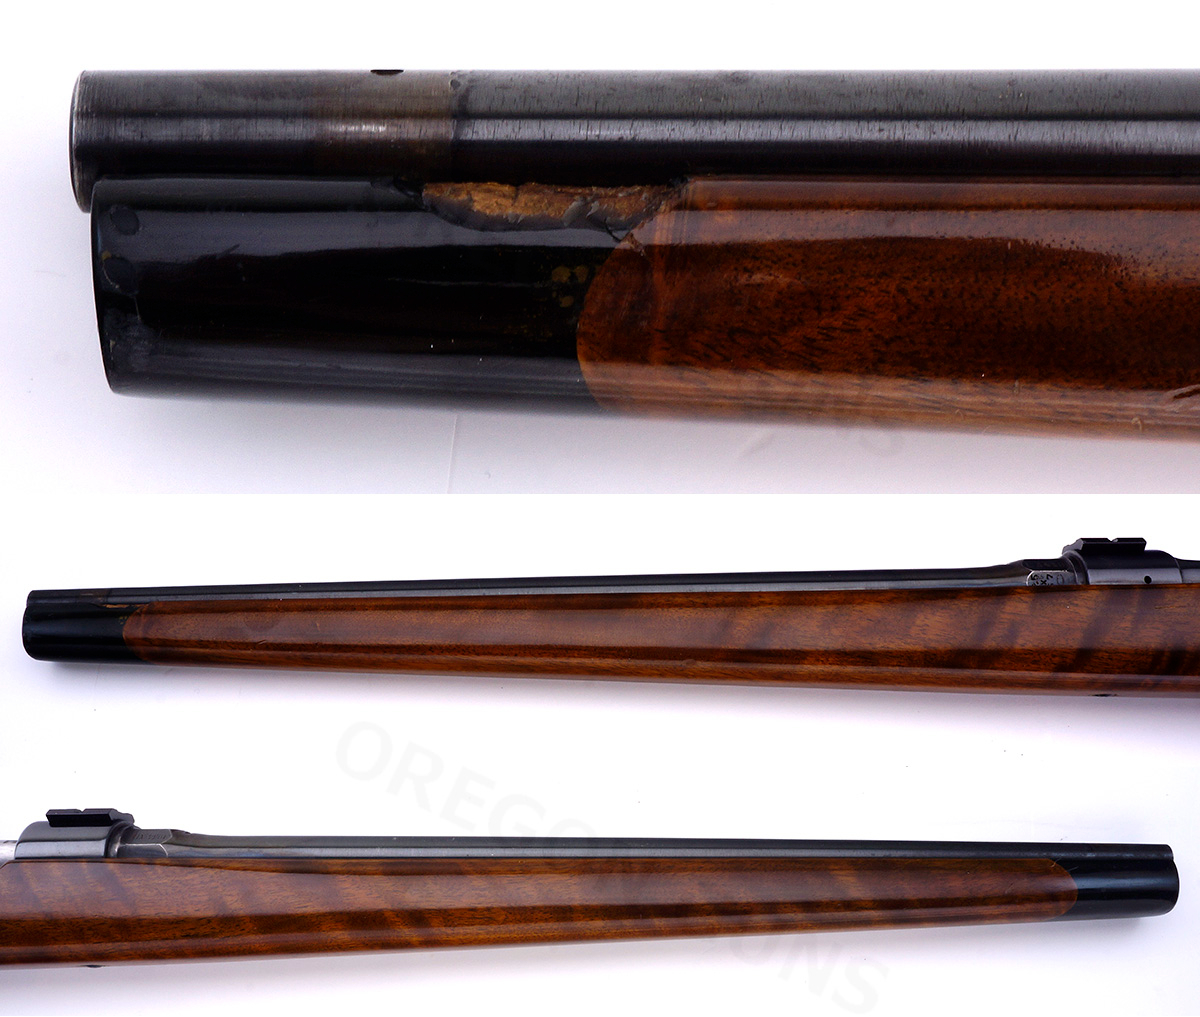 Carcano GARDONE VAL TROMPIA 91/28 BOLT RIFLE 1934-XII 6.5x57mm MAUSER C&R OK SN# L3418 6.5x57 Mauser - Picture 4